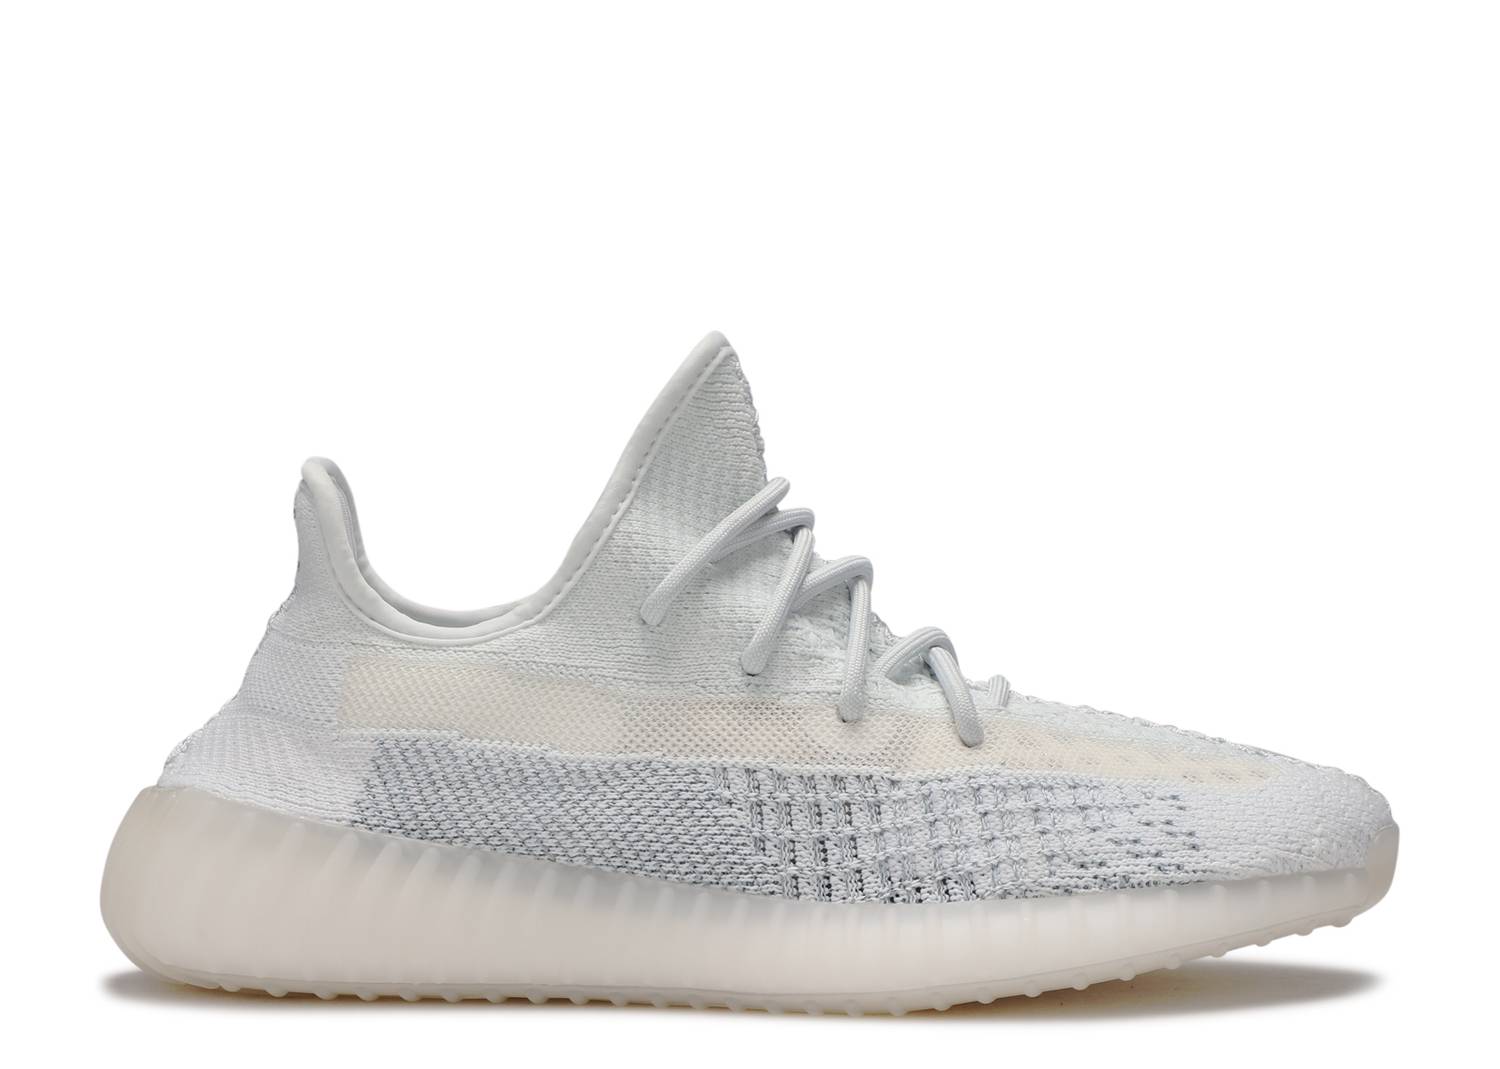 ADIDAS YEEZY BOOST 350 V2 “CLOUD WHITE”